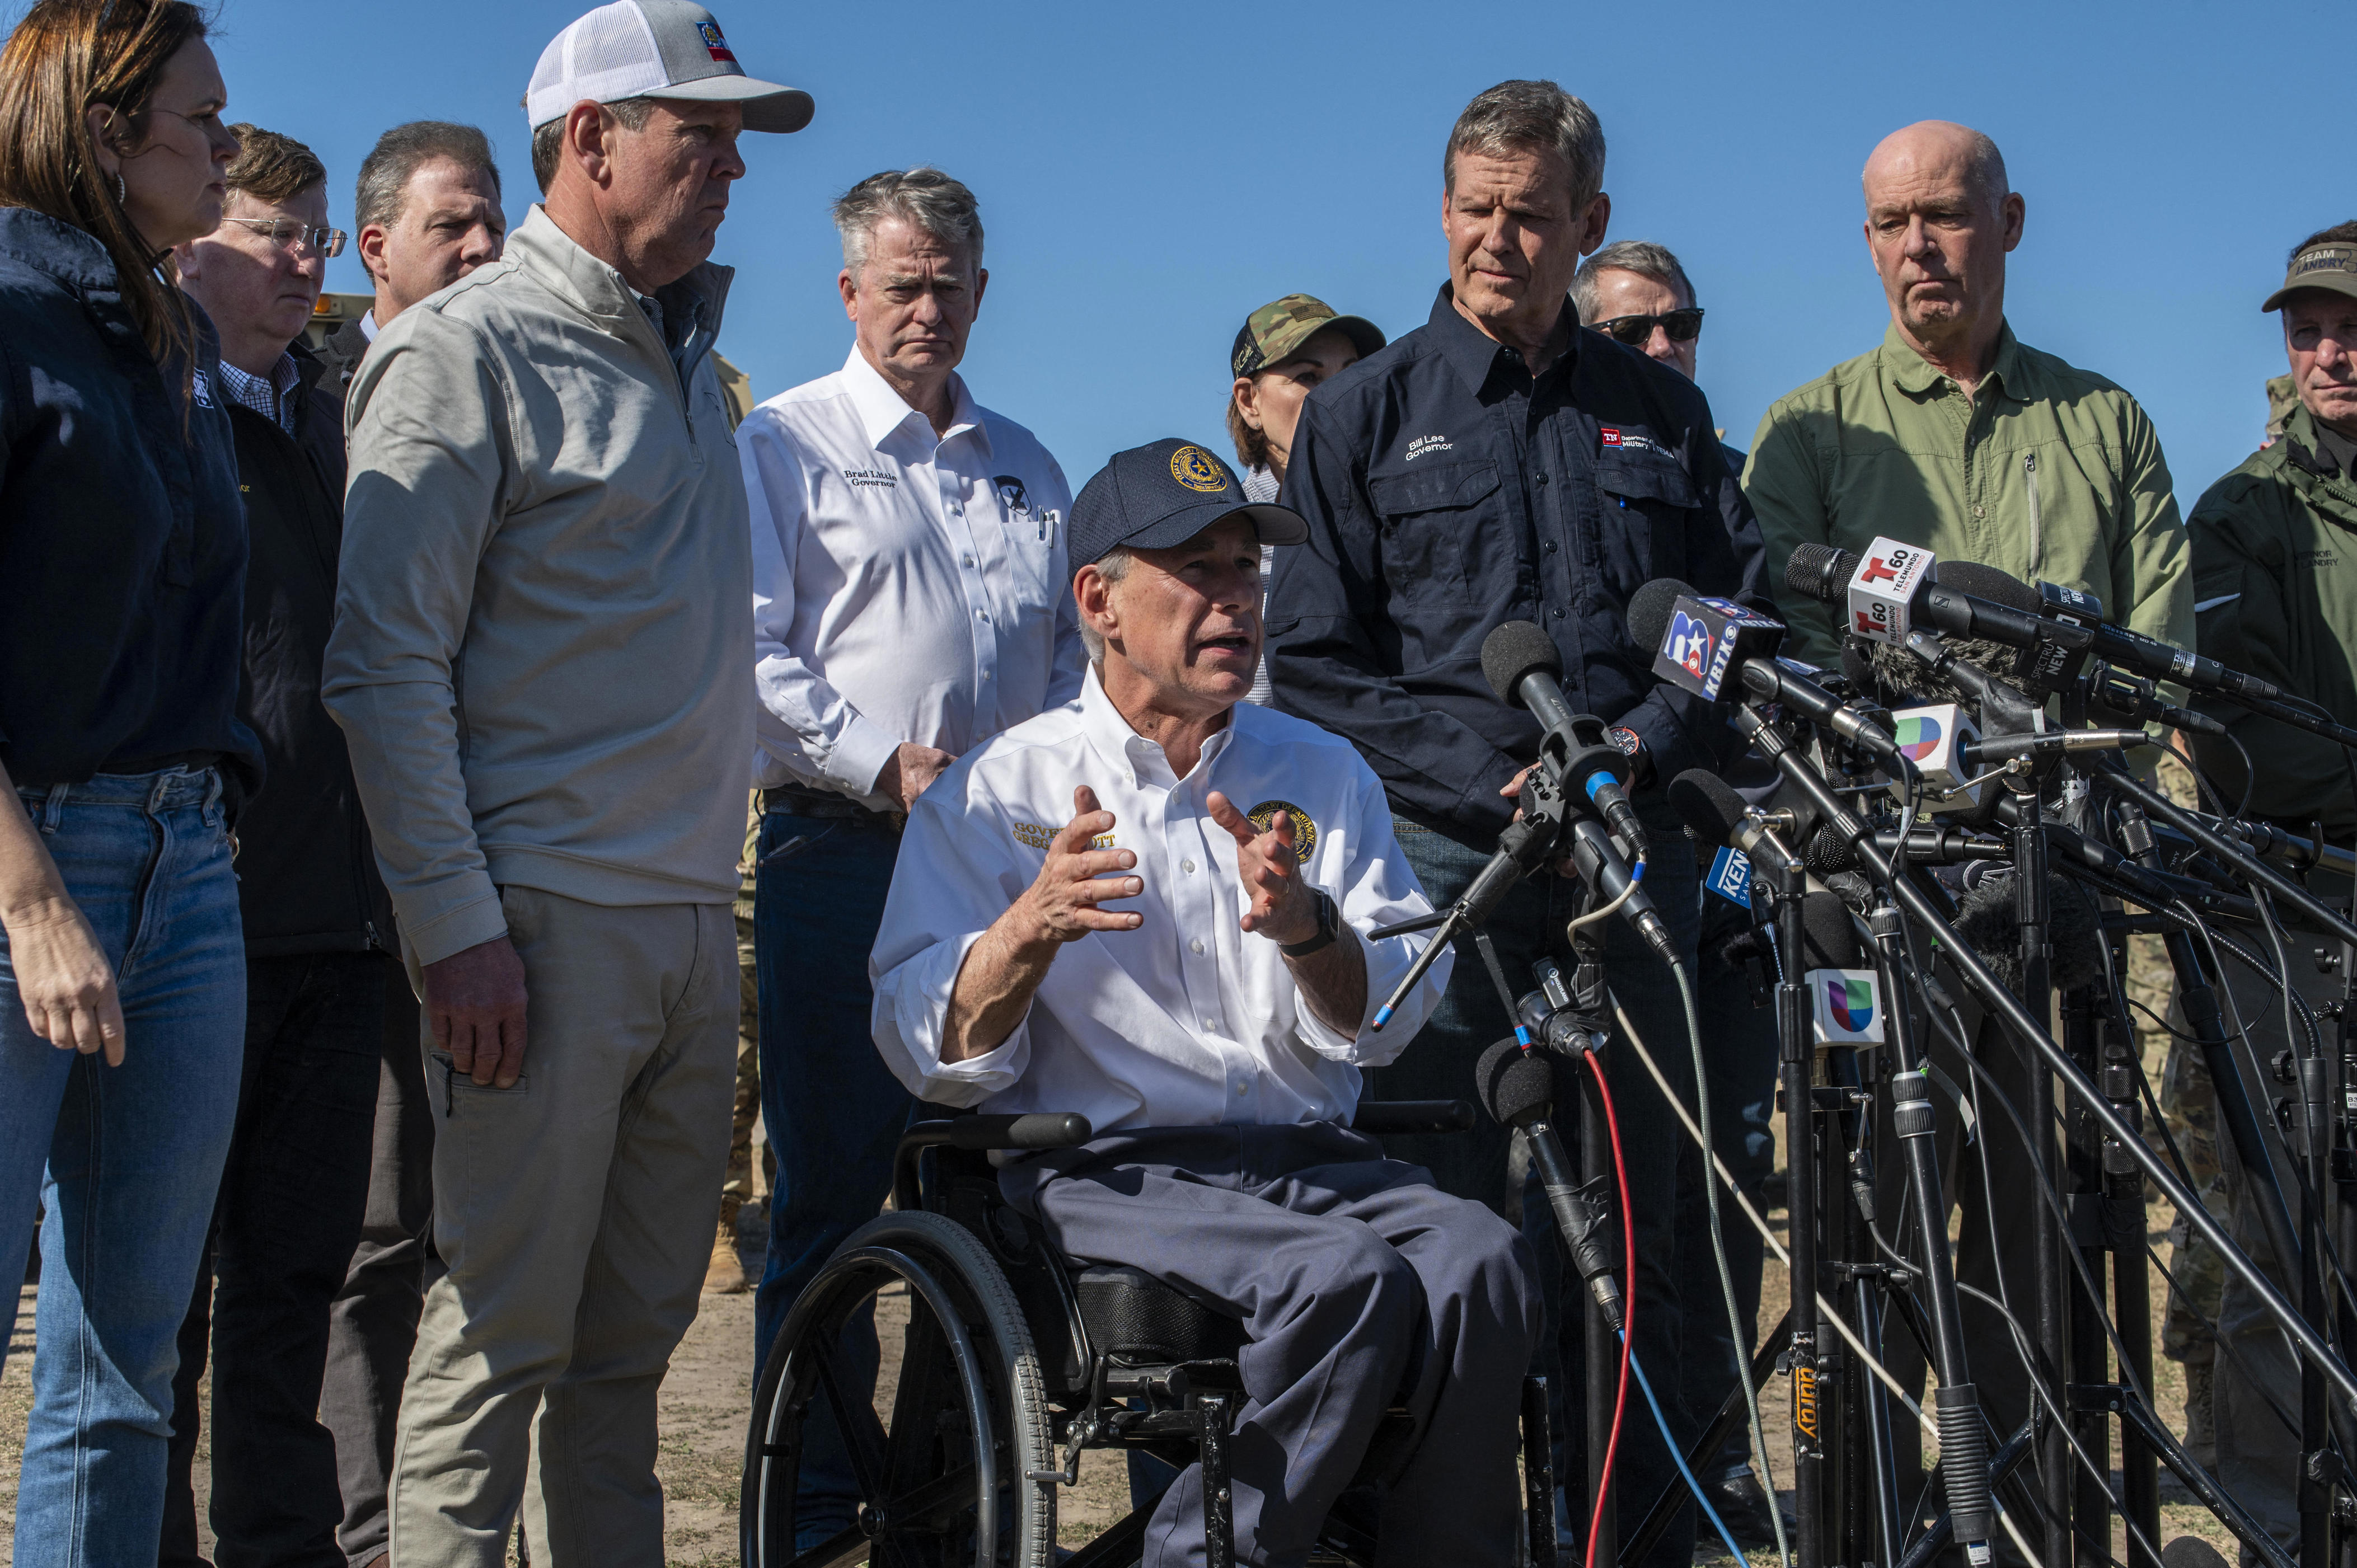 gov. abbott insists texas has right to protect border amid feud with biden